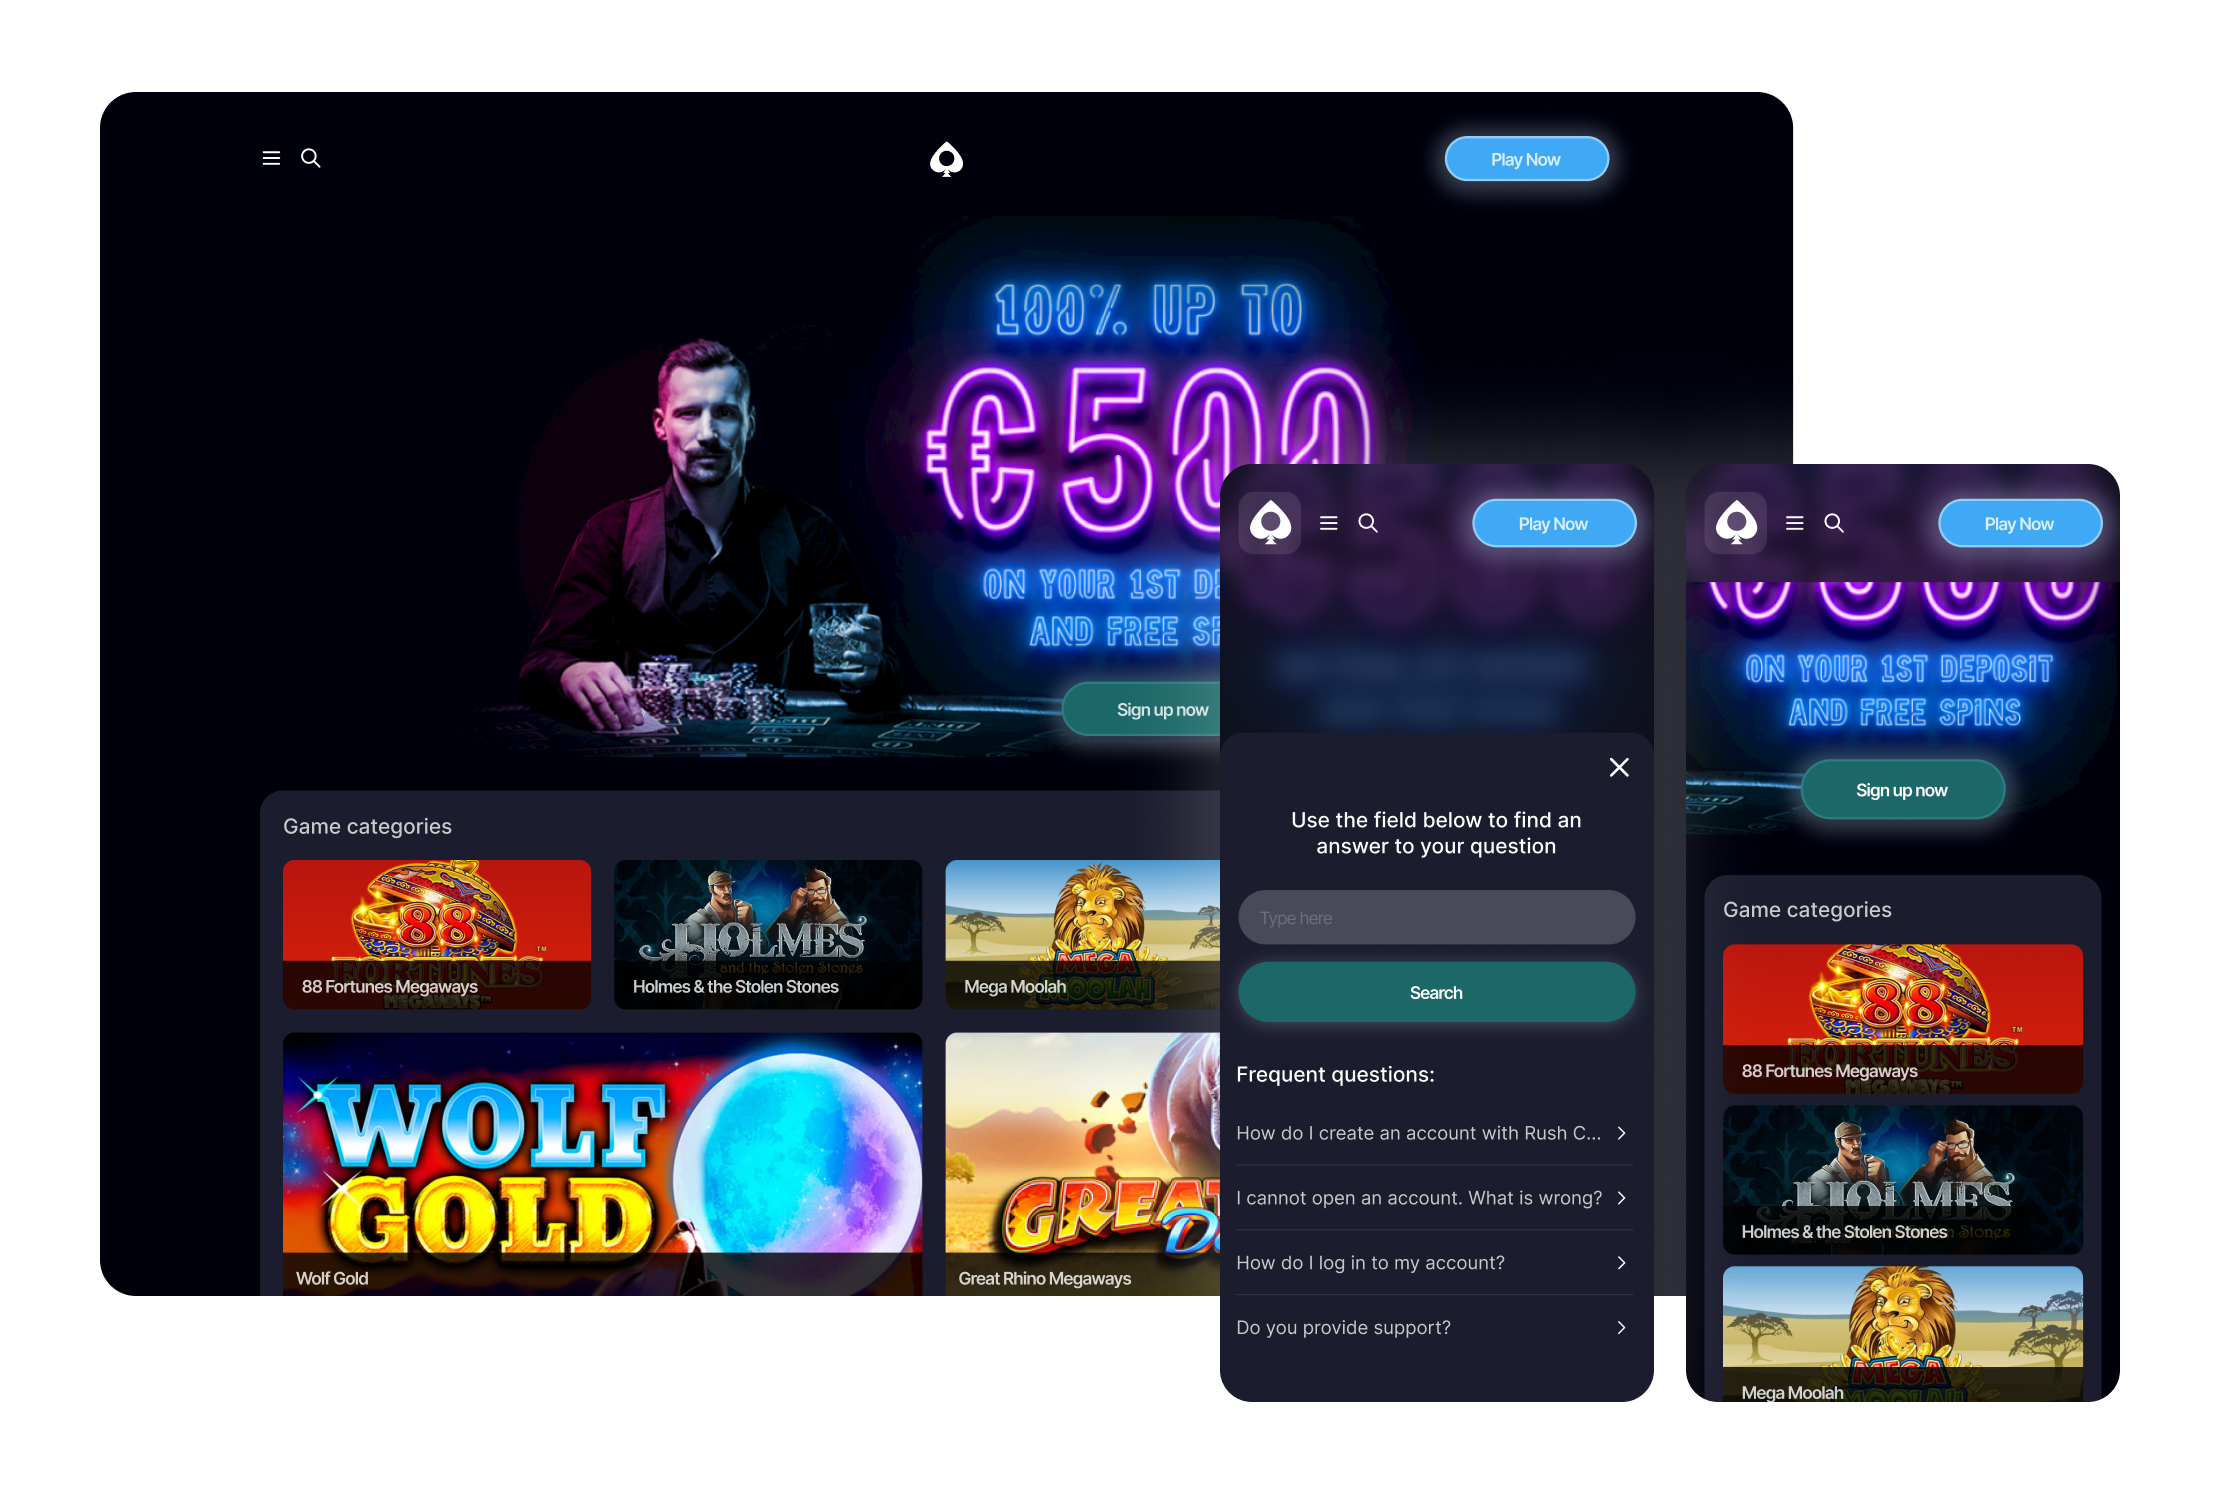 Web and mobile versions of the iGaming platform